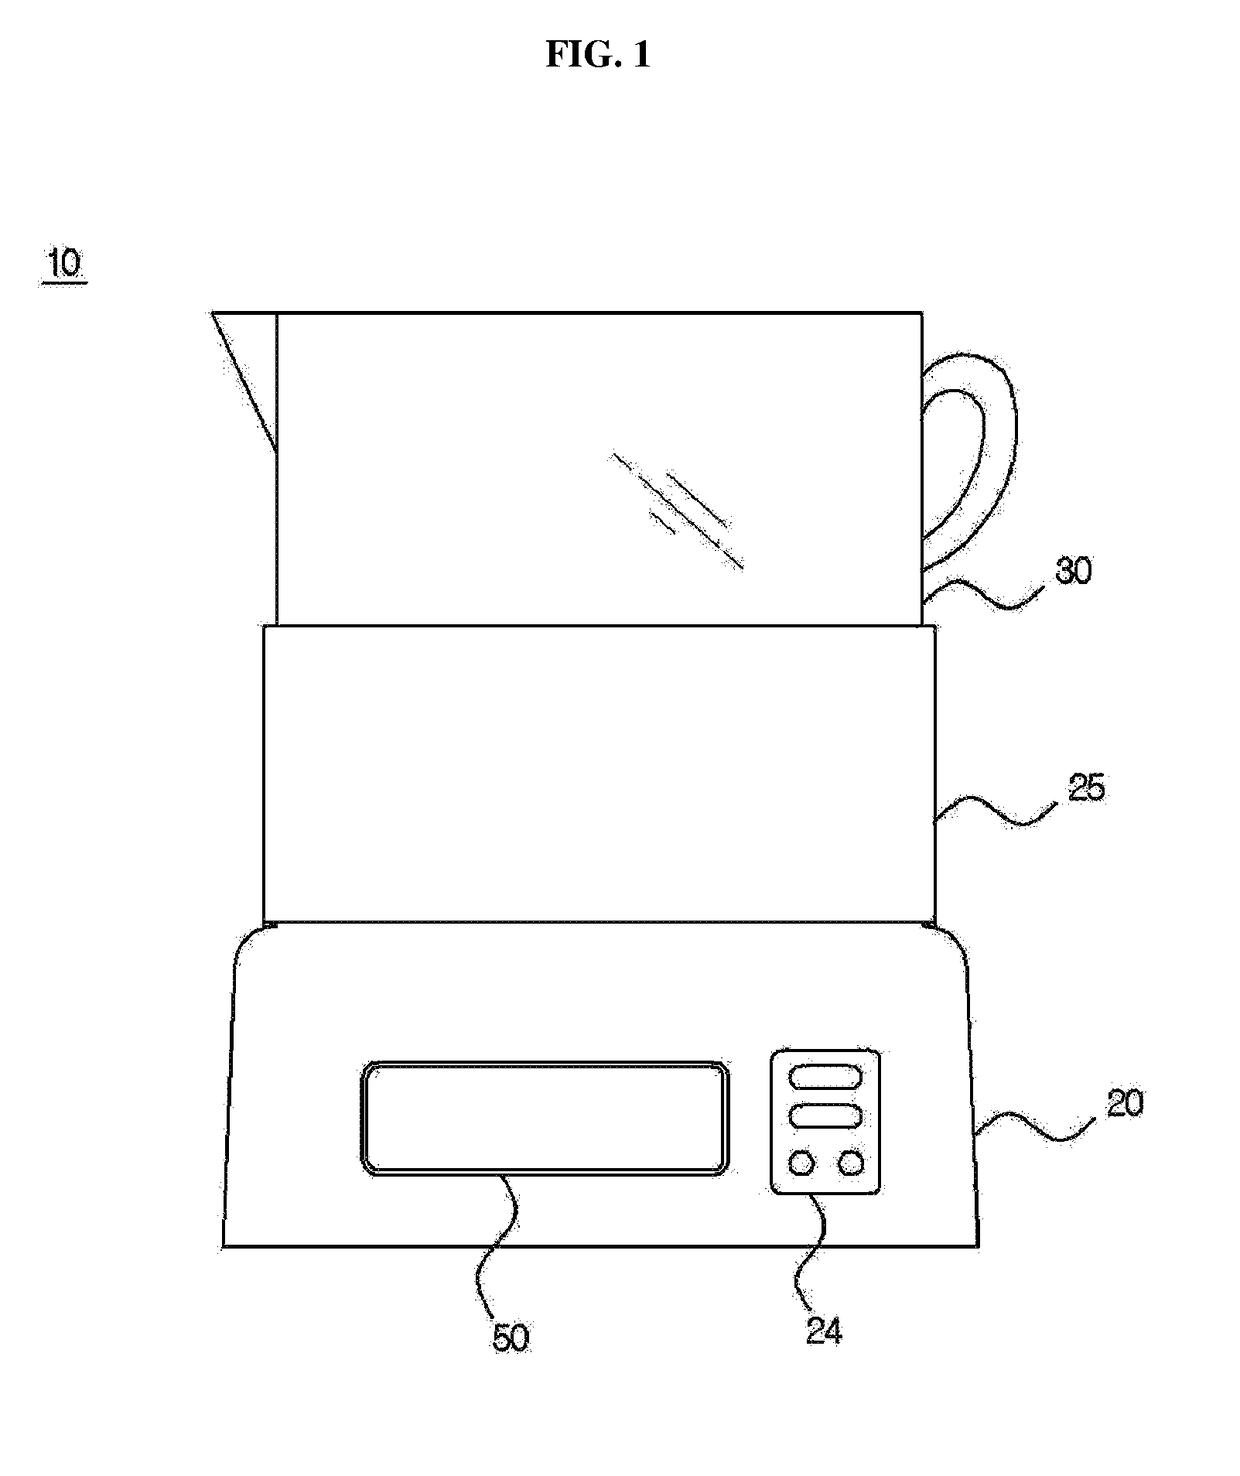 Electric pot provided with infrared temperature sensor